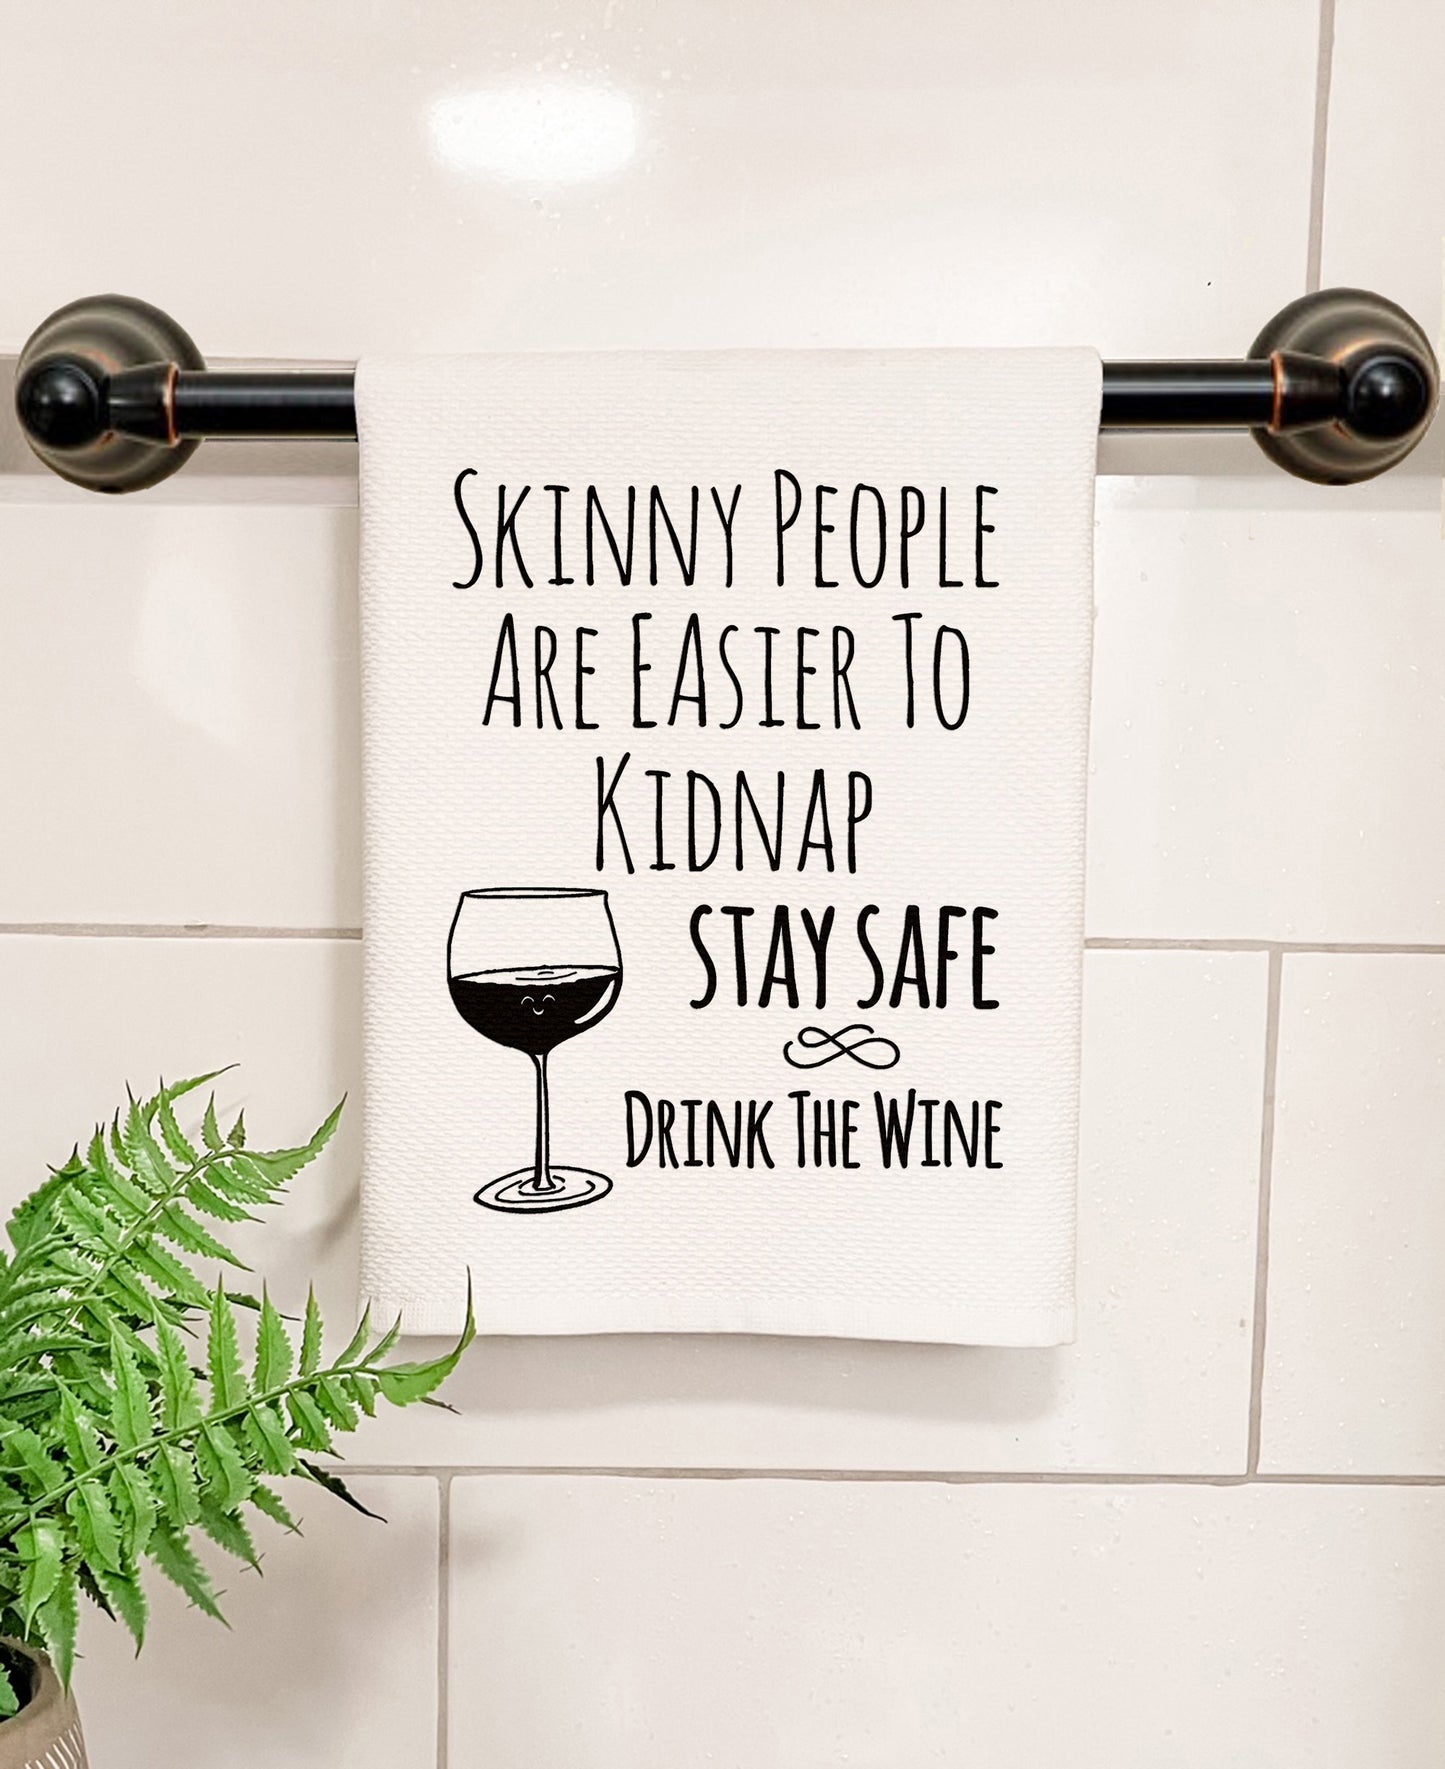 Skinny People Are Easier To Kidnap, Stay Safe Drink The Wine - Kitchen/Bathroom Hand Towel (Waffle Weave) - MoonlightMakers